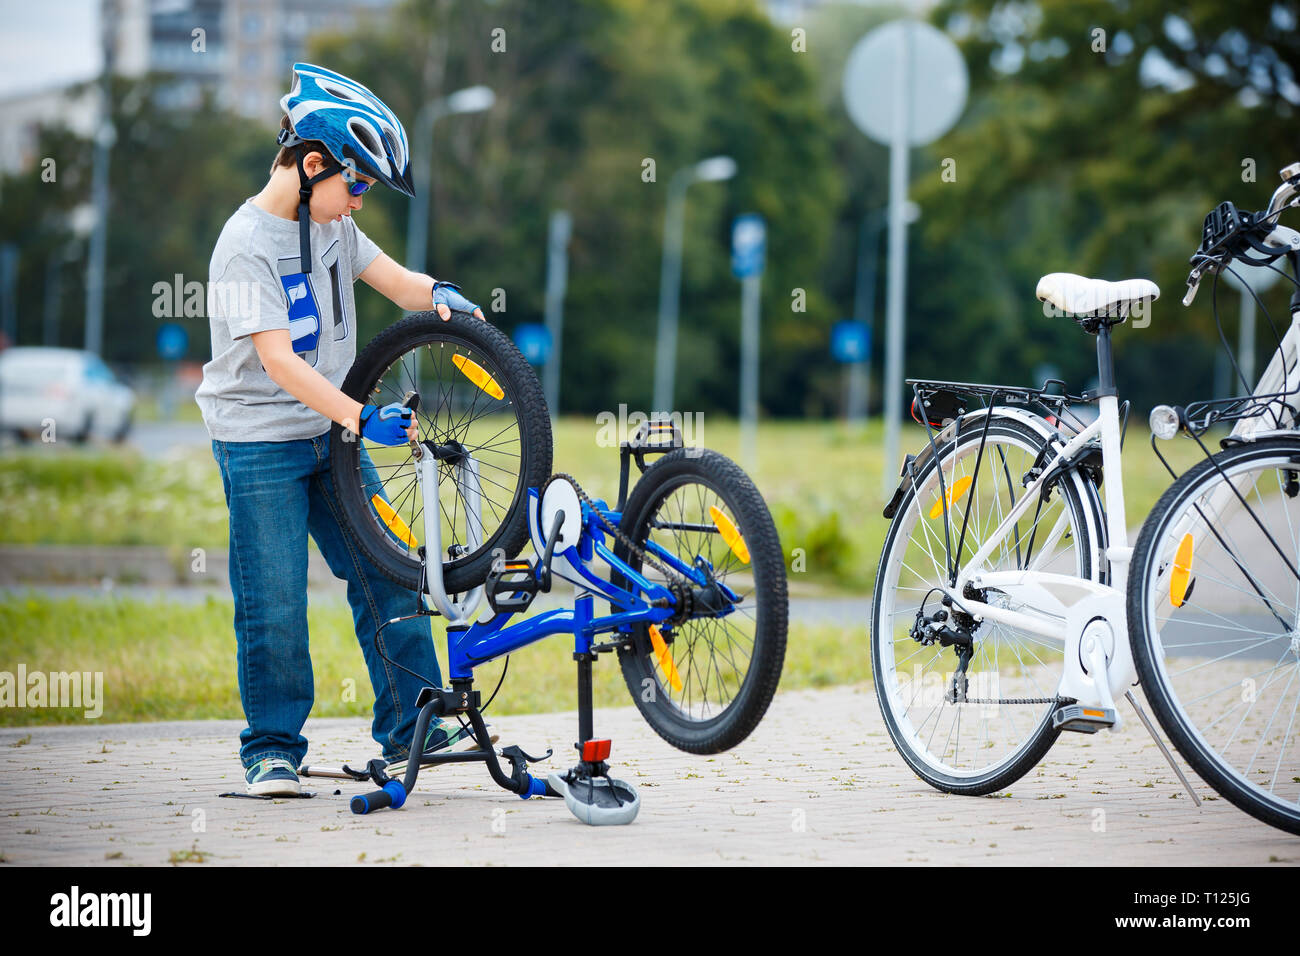 Cute little boy repairing his bicycle outdoors Stock Photo